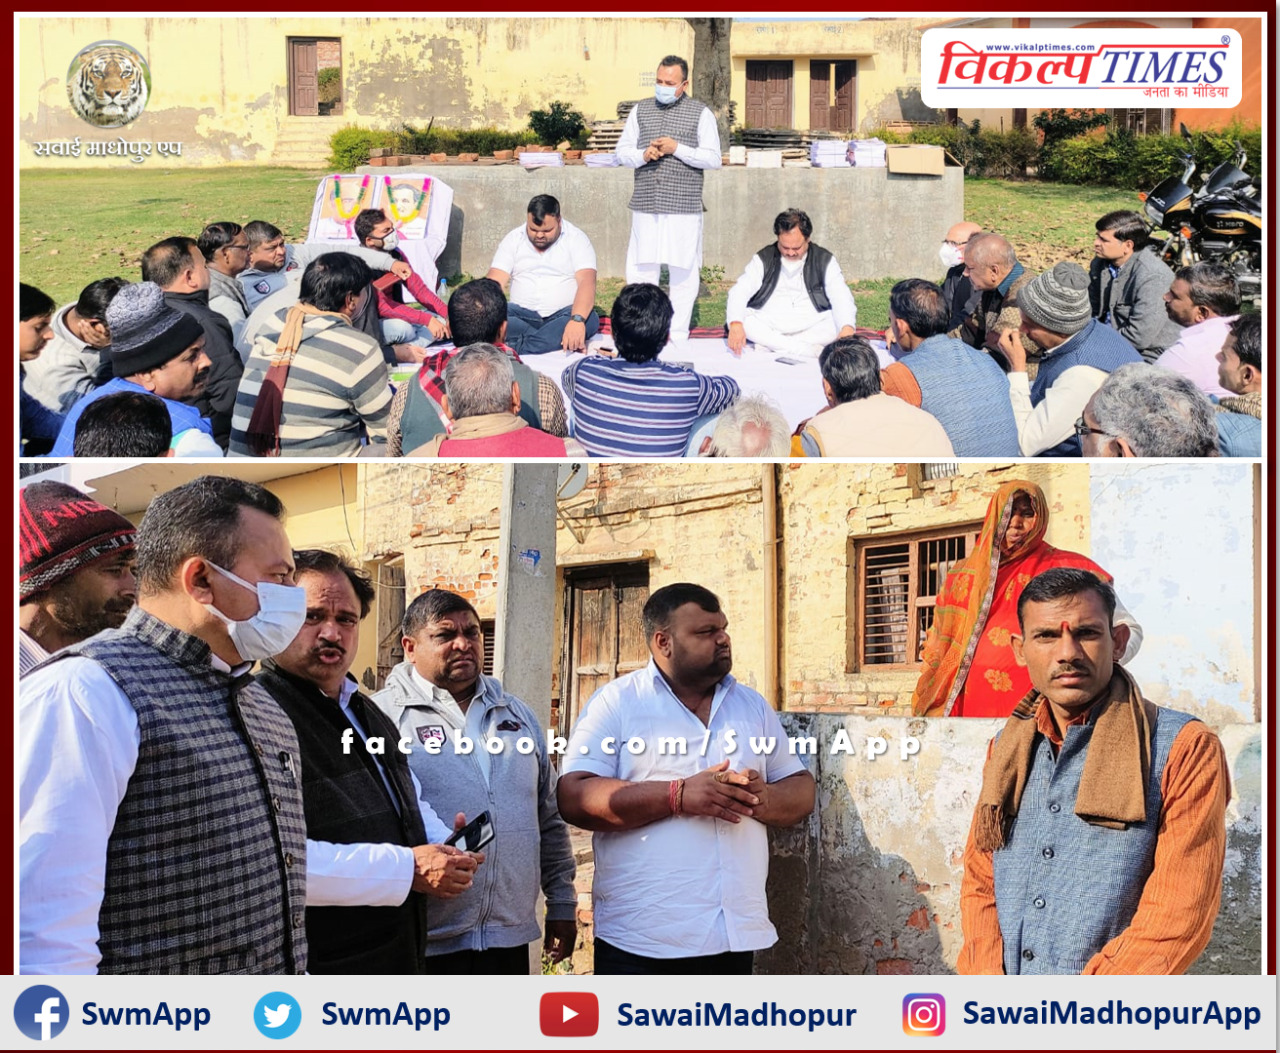 Dr. Chaturvedi had organizational discussion with the bjp workers in uttarpradesh